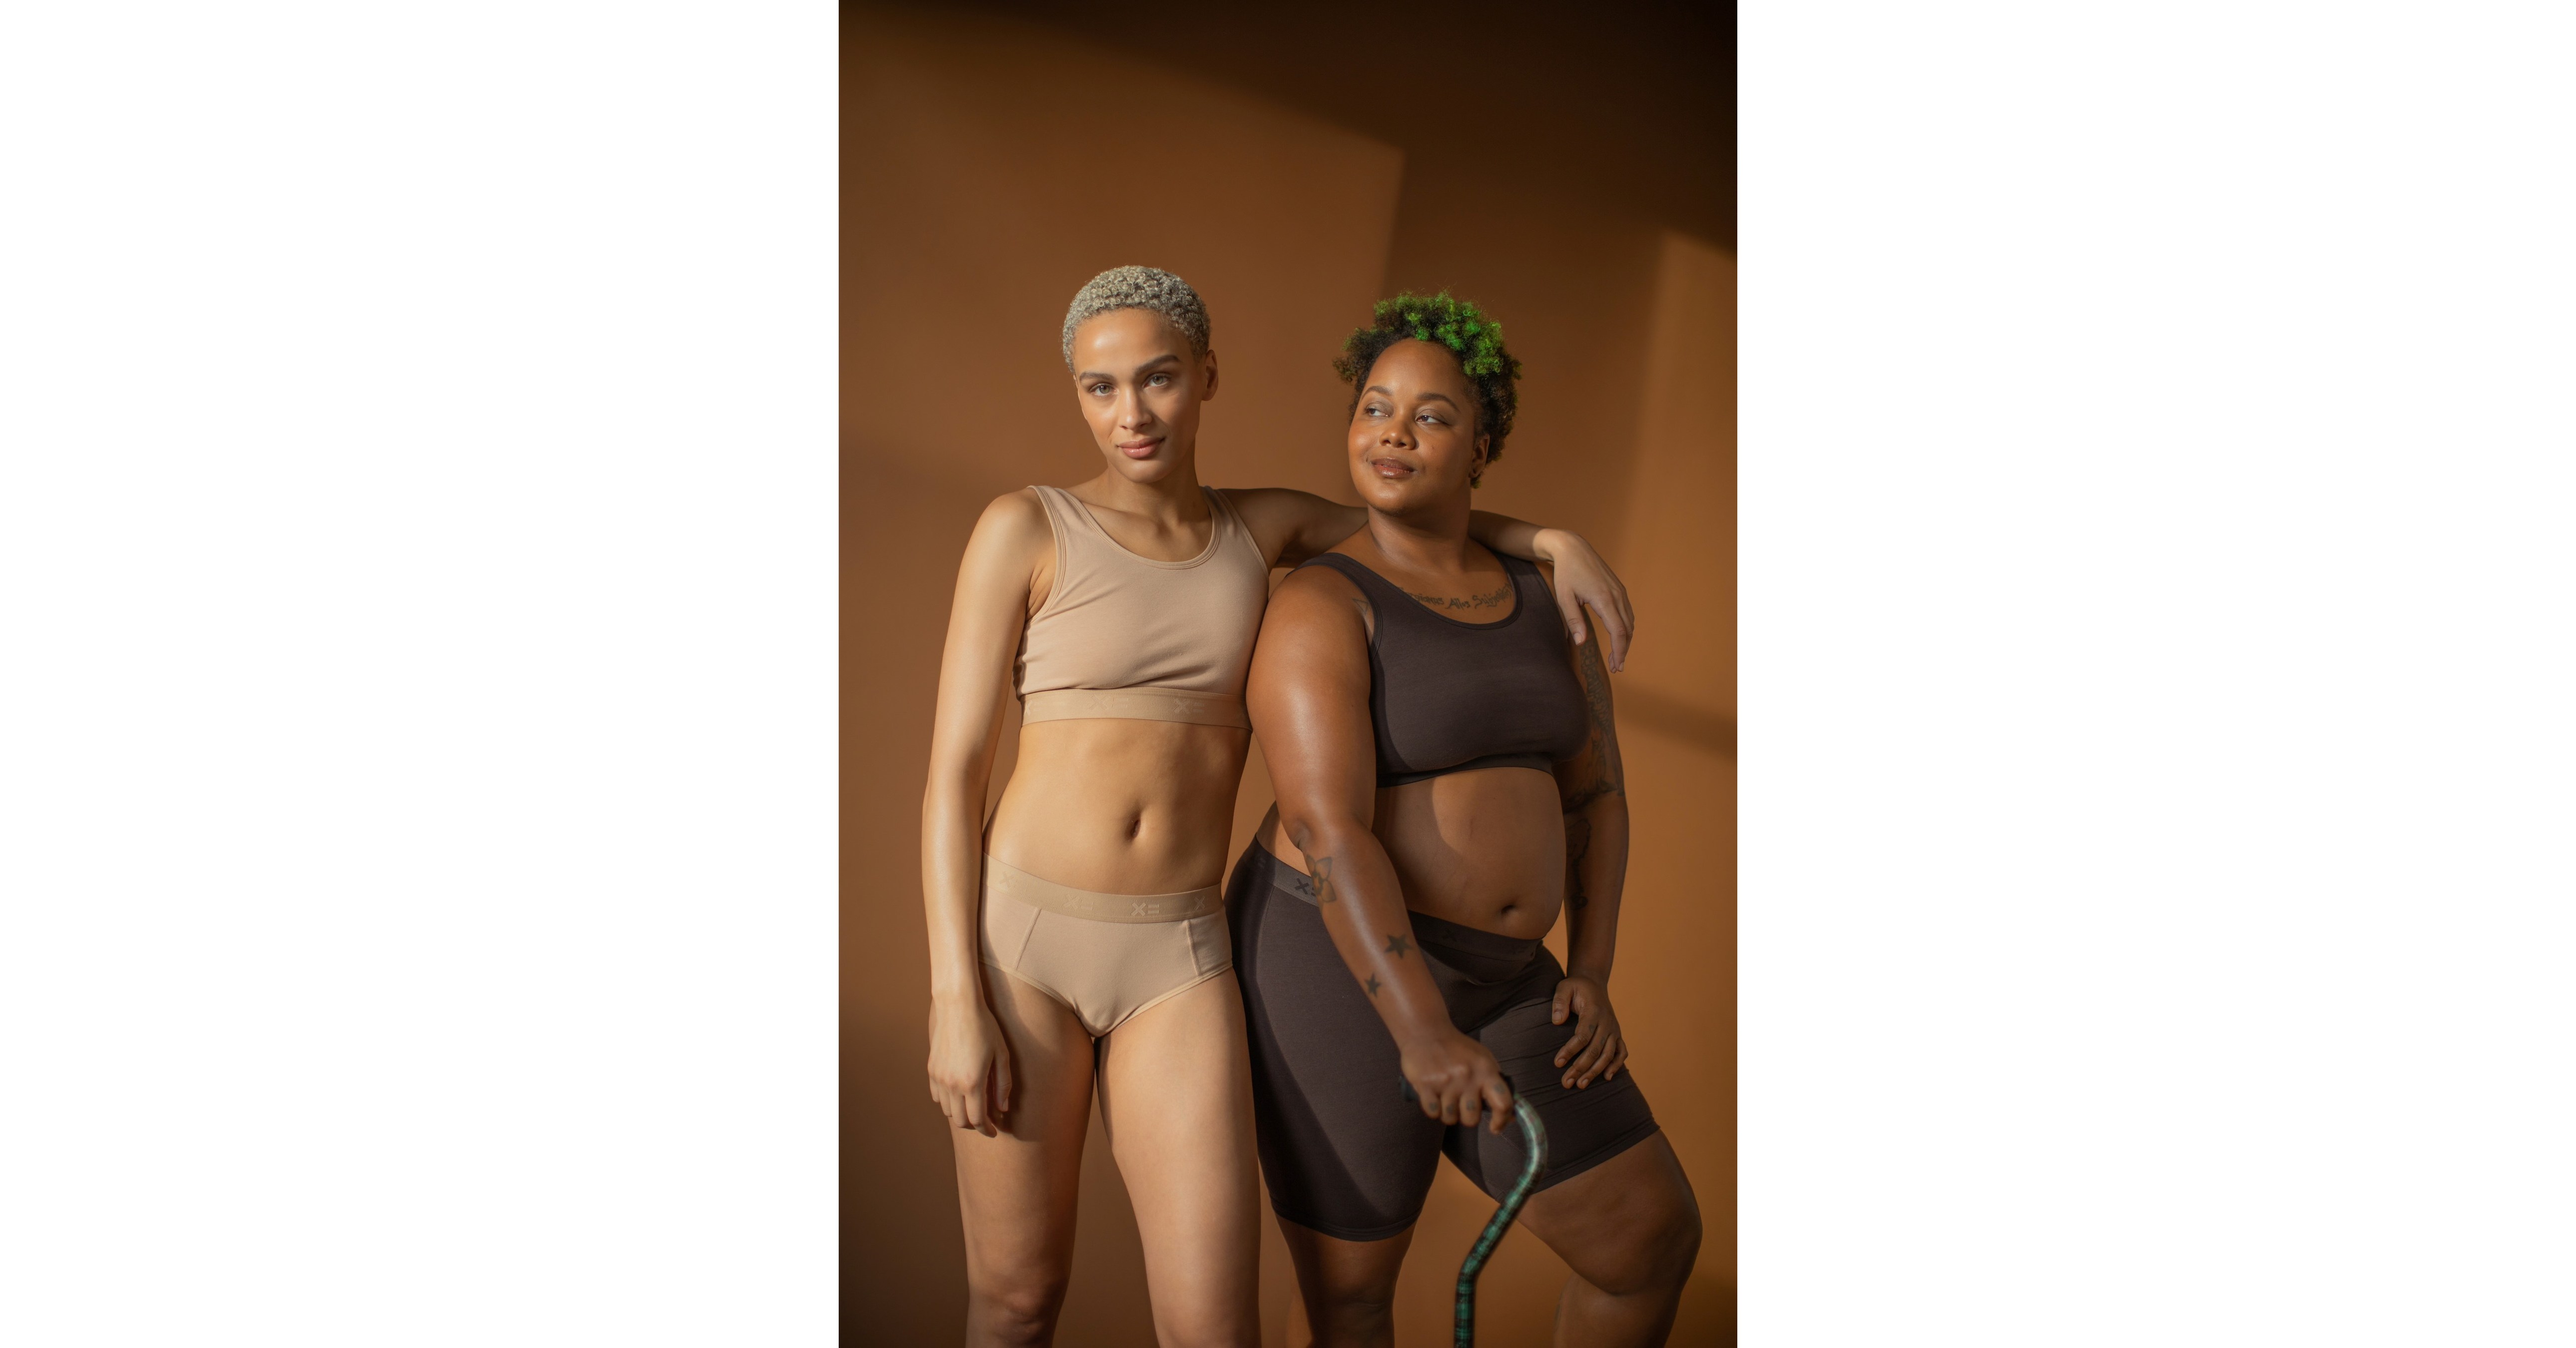 TomboyX Launches an Underwear Collection That Is Shade, Gender